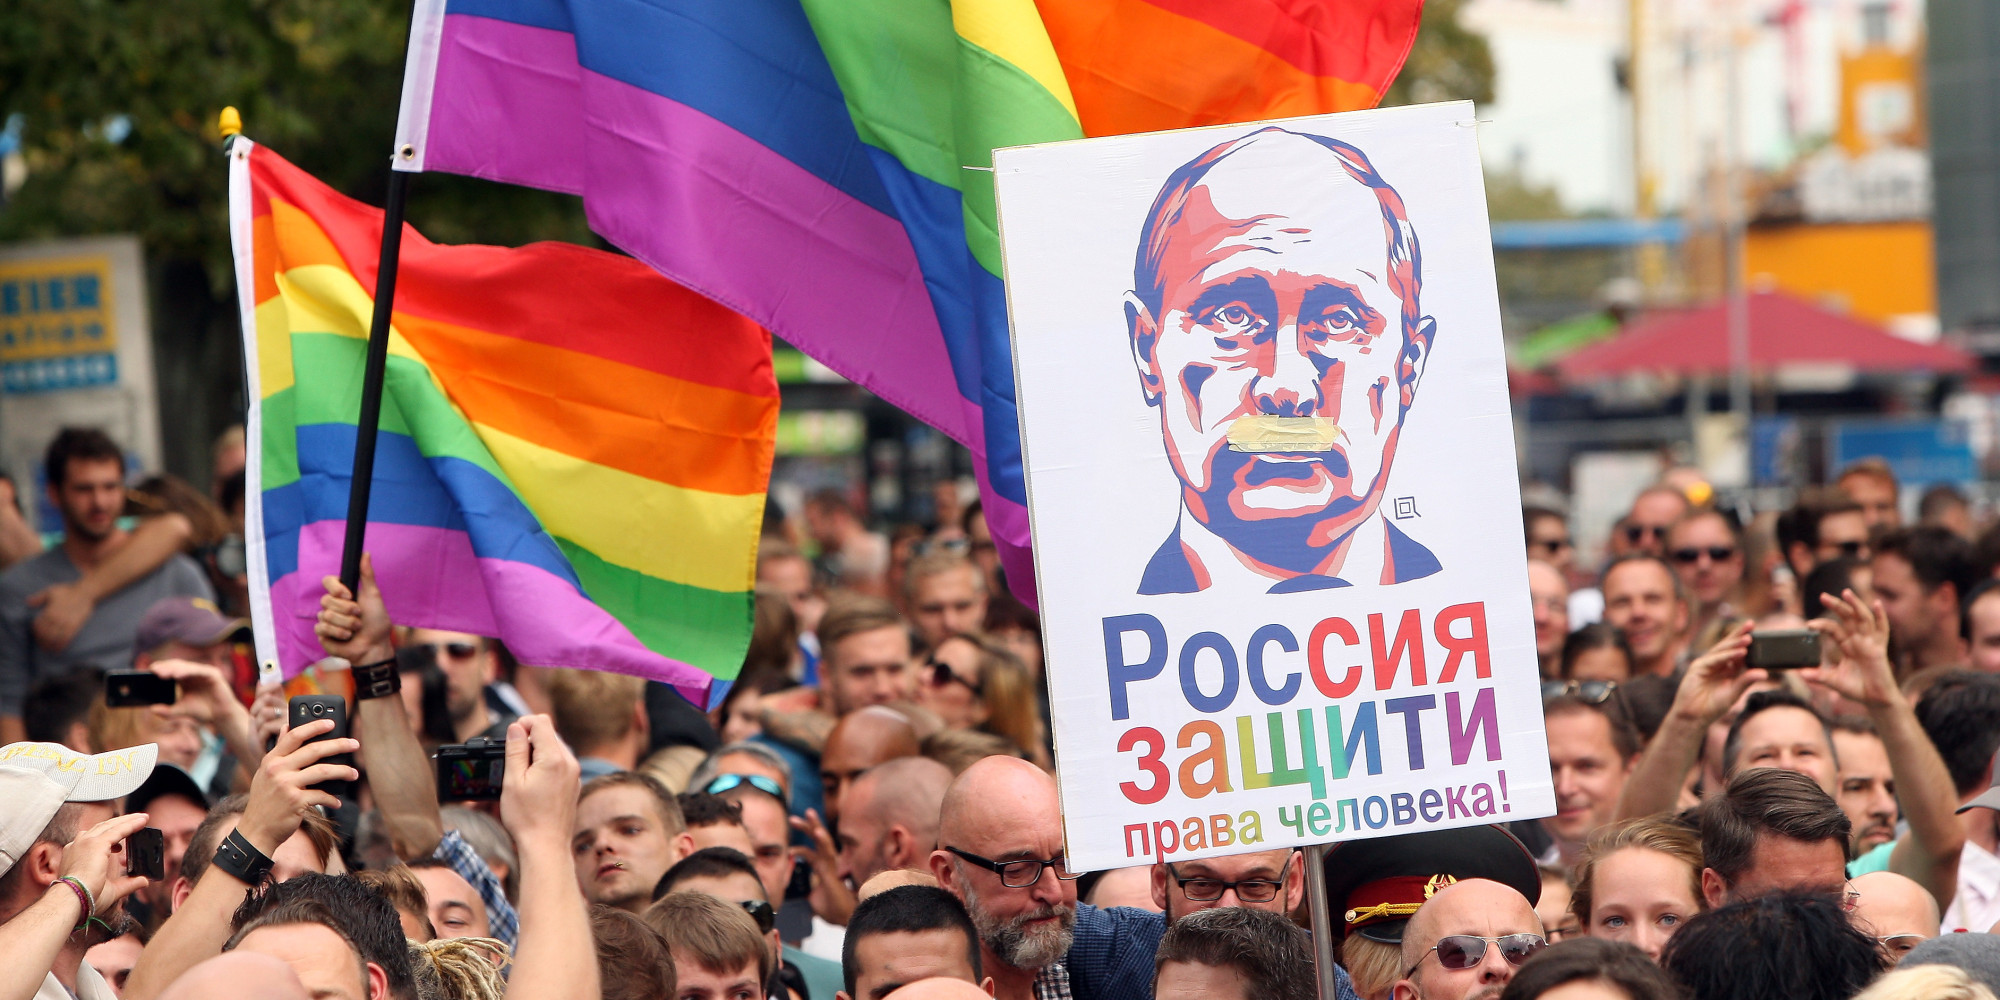 Russia S Gay Laws Putin S Lgbt Stance Discussed By Activists At Davos Panel Huffpost